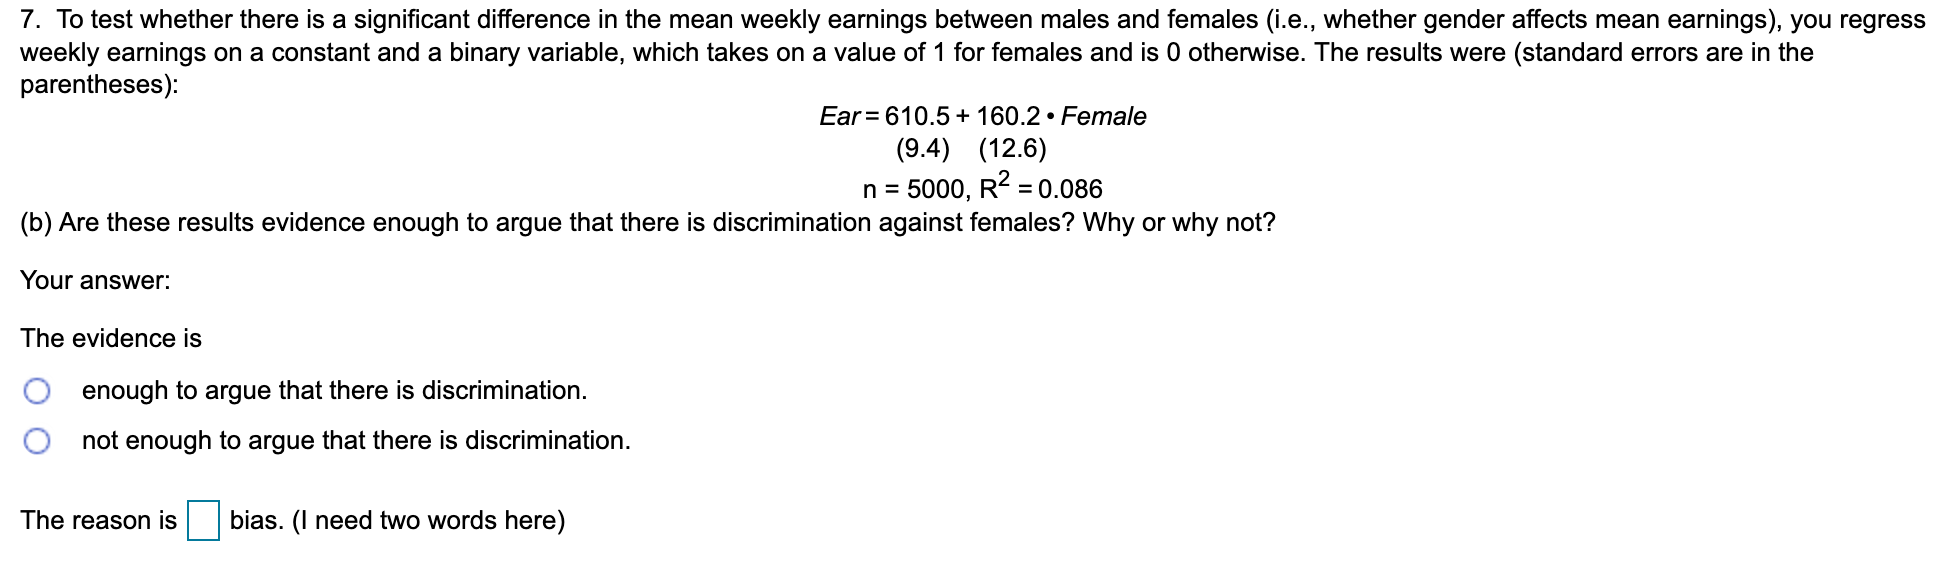 7. To test whether there is a significant difference in the mean weekly earnings between males and females (i.e., whether gender affects mean earnings), you regress
weekly earnings on a constant and a binary variable, which takes on a value of 1 for females and is 0 otherwise. The results were (standard errors are in the
parentheses):
Ear = 610.5 + 160.2 • Female
(9.4) (12.6)
n = 5000, R2 = 0.086
(b) Are these results evidence enough to argue that there is discrimination against females? Why or why not?
Your answer:
The evidence is
enough to argue that there is discrimination.
not enough to argue that there is discrimination.
The reason is
bias. (I need two words here)
